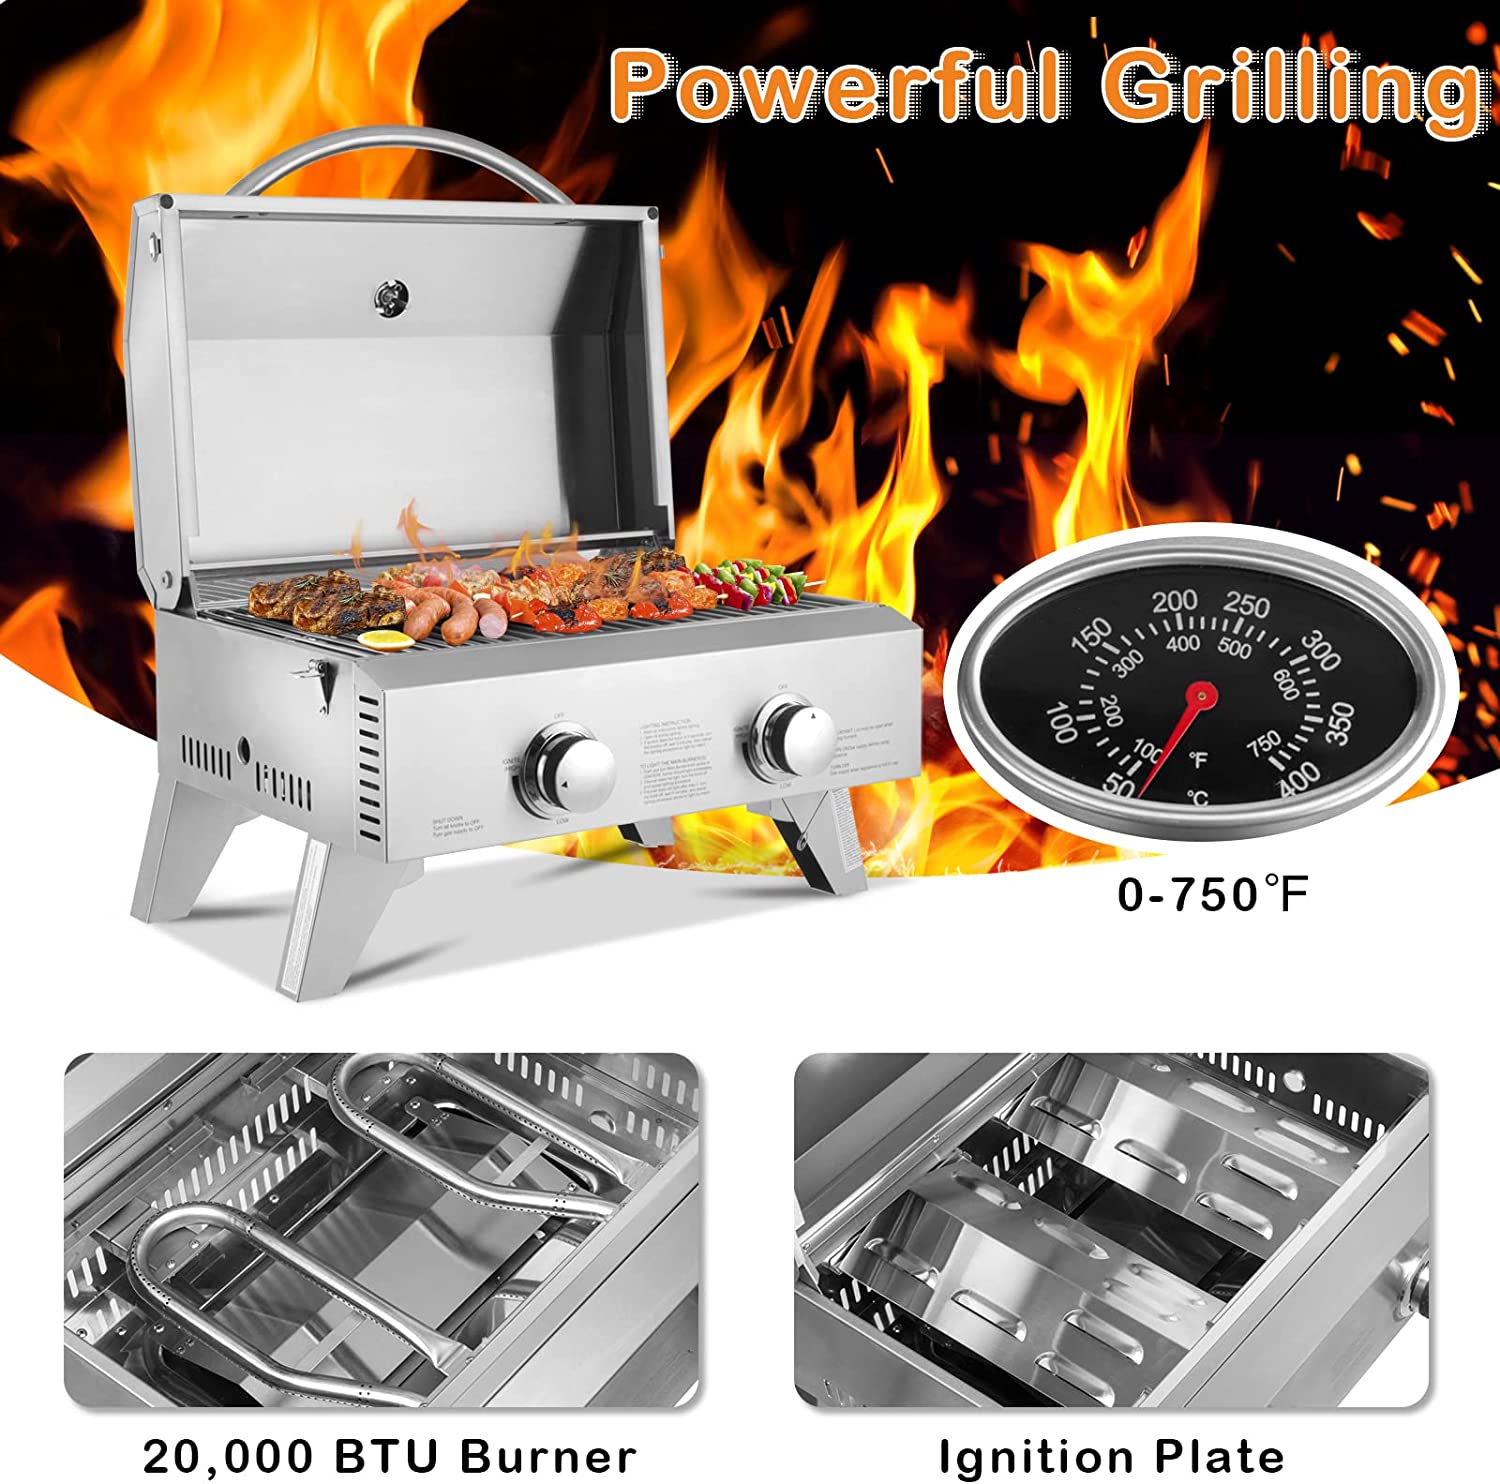 ROVSUN Extra Large 20,000 BTU Portable Gas Grill, 2 Burner Tabletop Propane Griddle with Foldable Legs, Regulator & Full Stainless Steel for Home Outdoor Picnic Camping Trip, Patio Garden BBQ - image 3 of 9